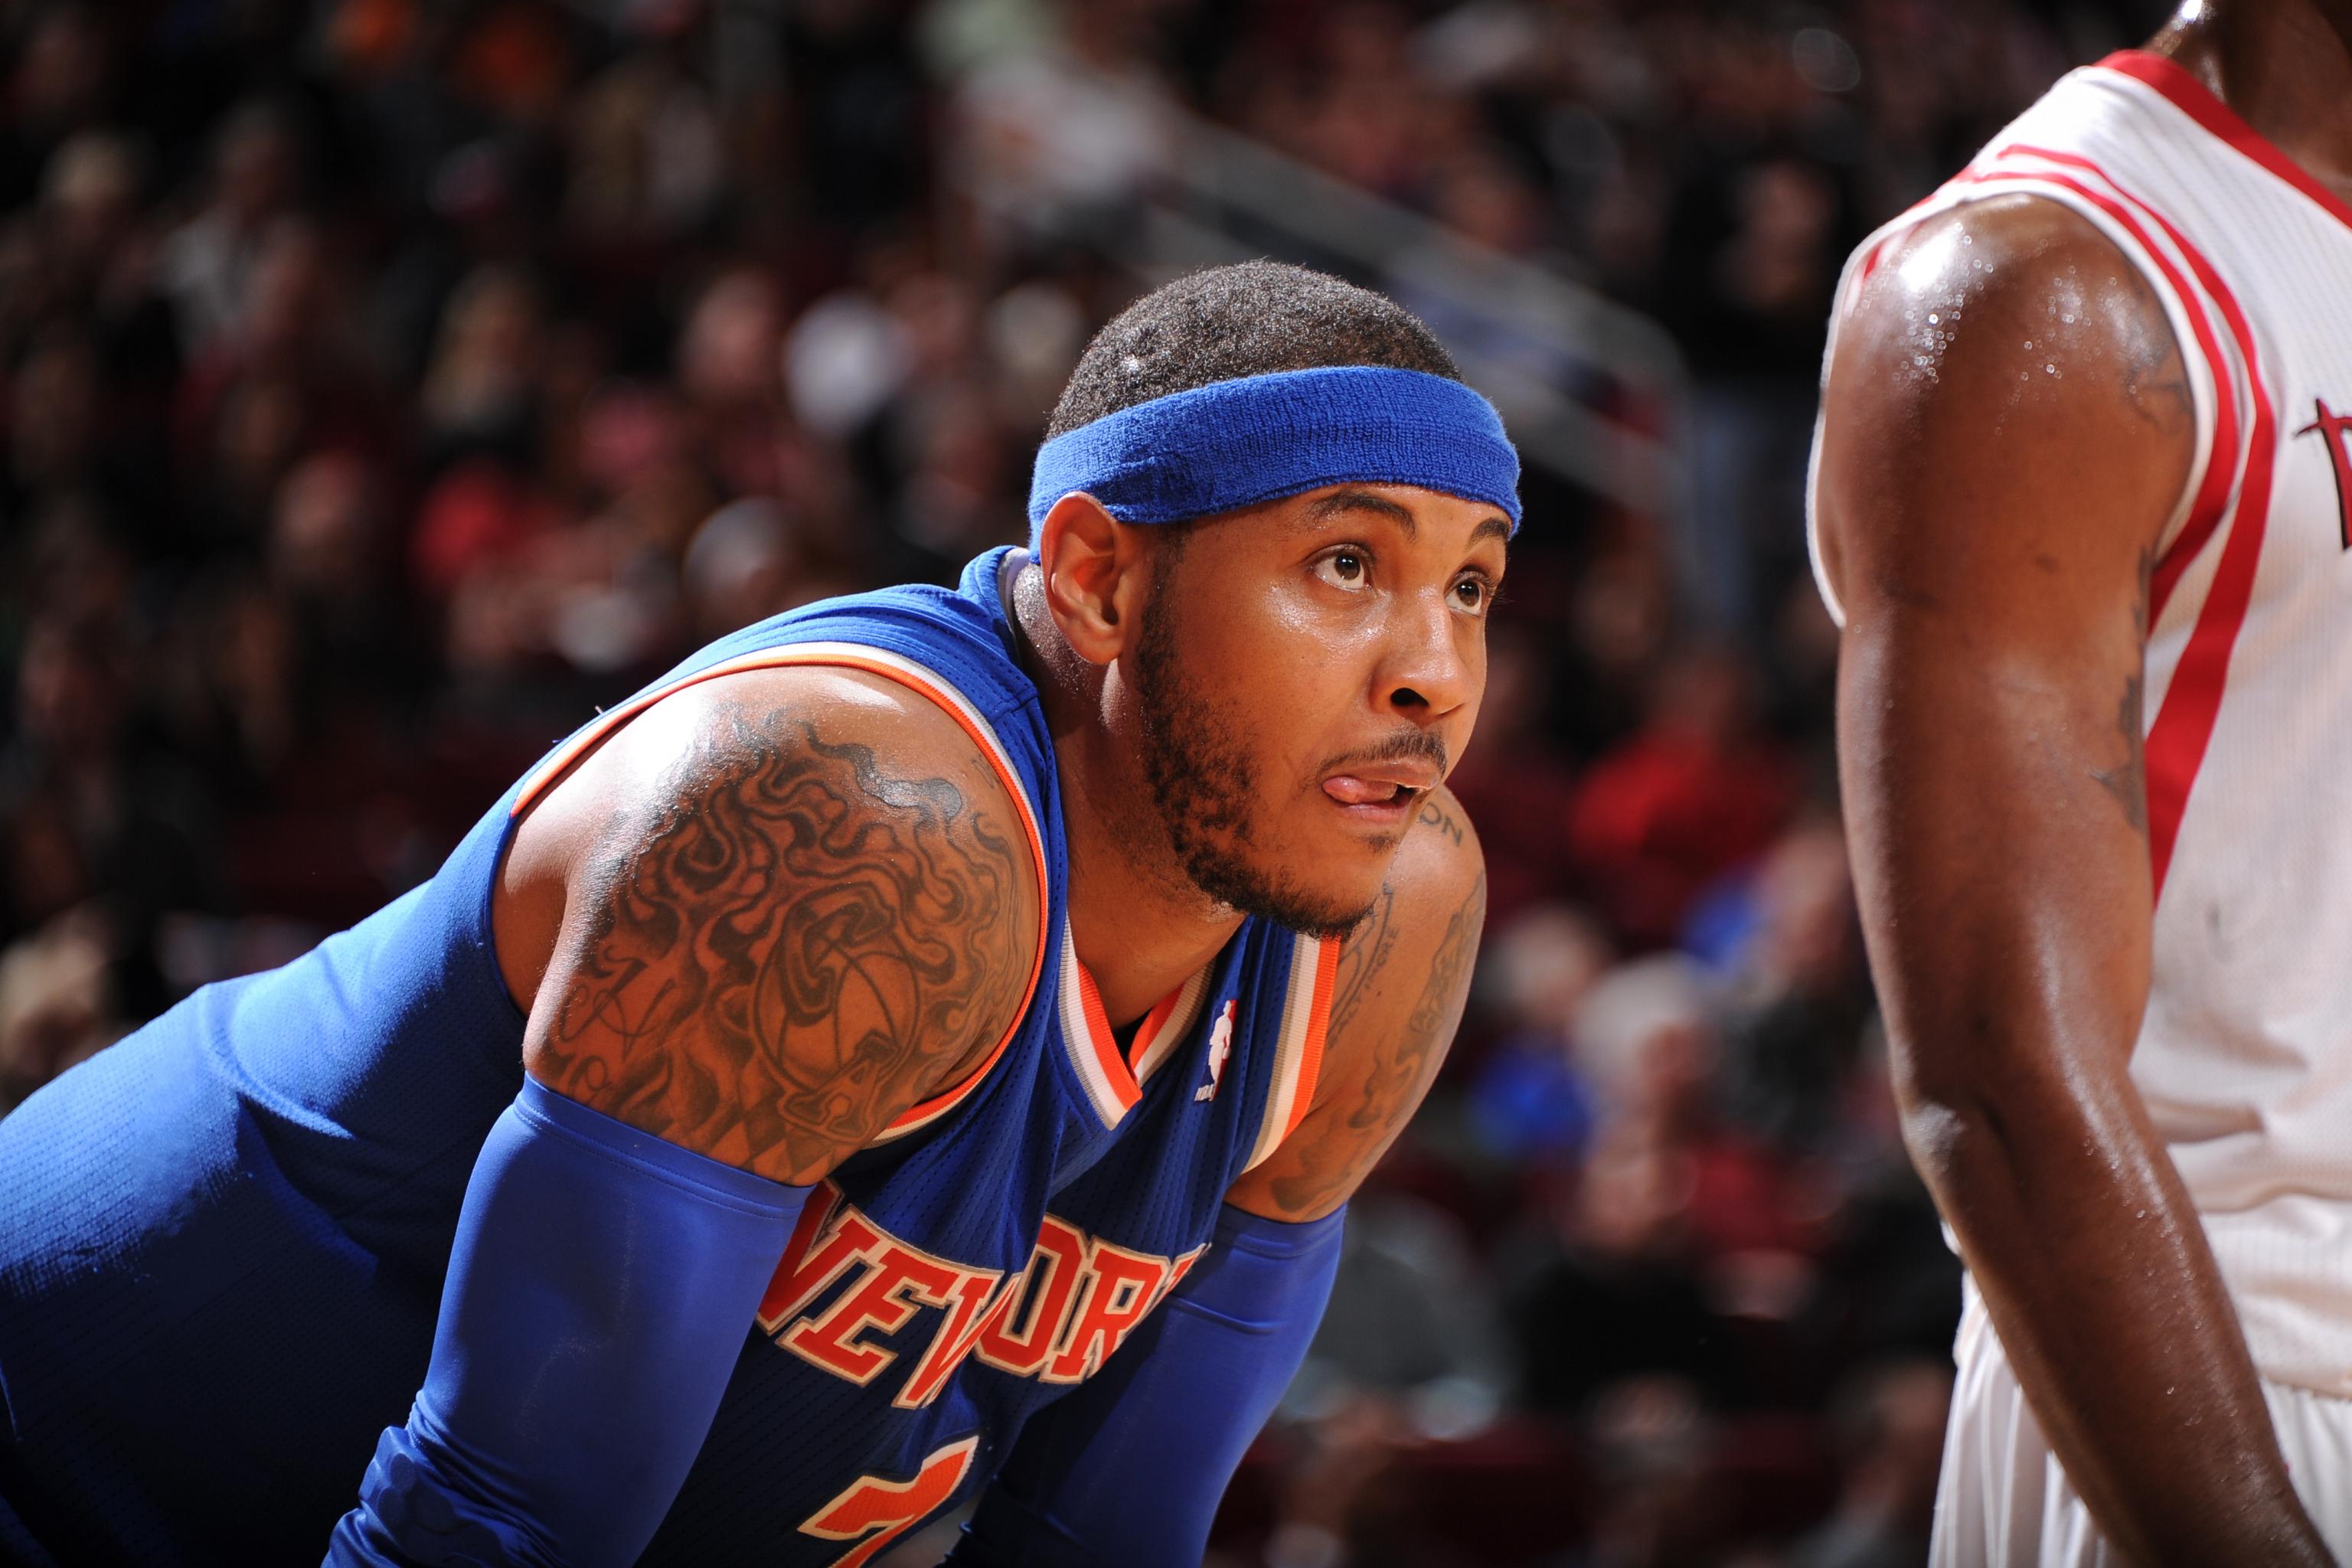 New York Knicks: The case for and against bringing Carmelo Anthony back